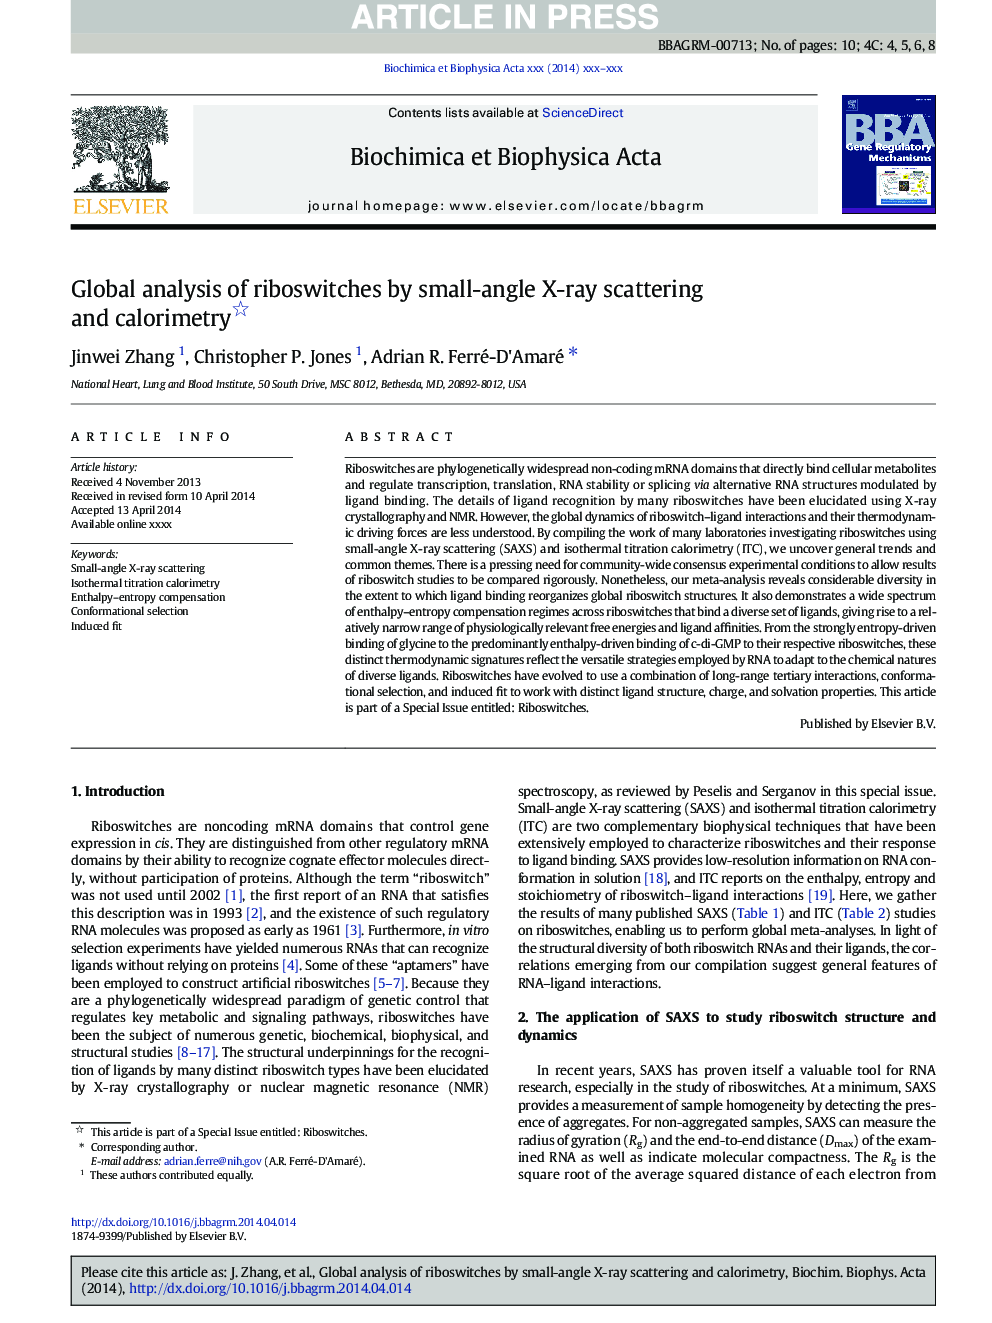 Global analysis of riboswitches by small-angle X-ray scattering and calorimetry